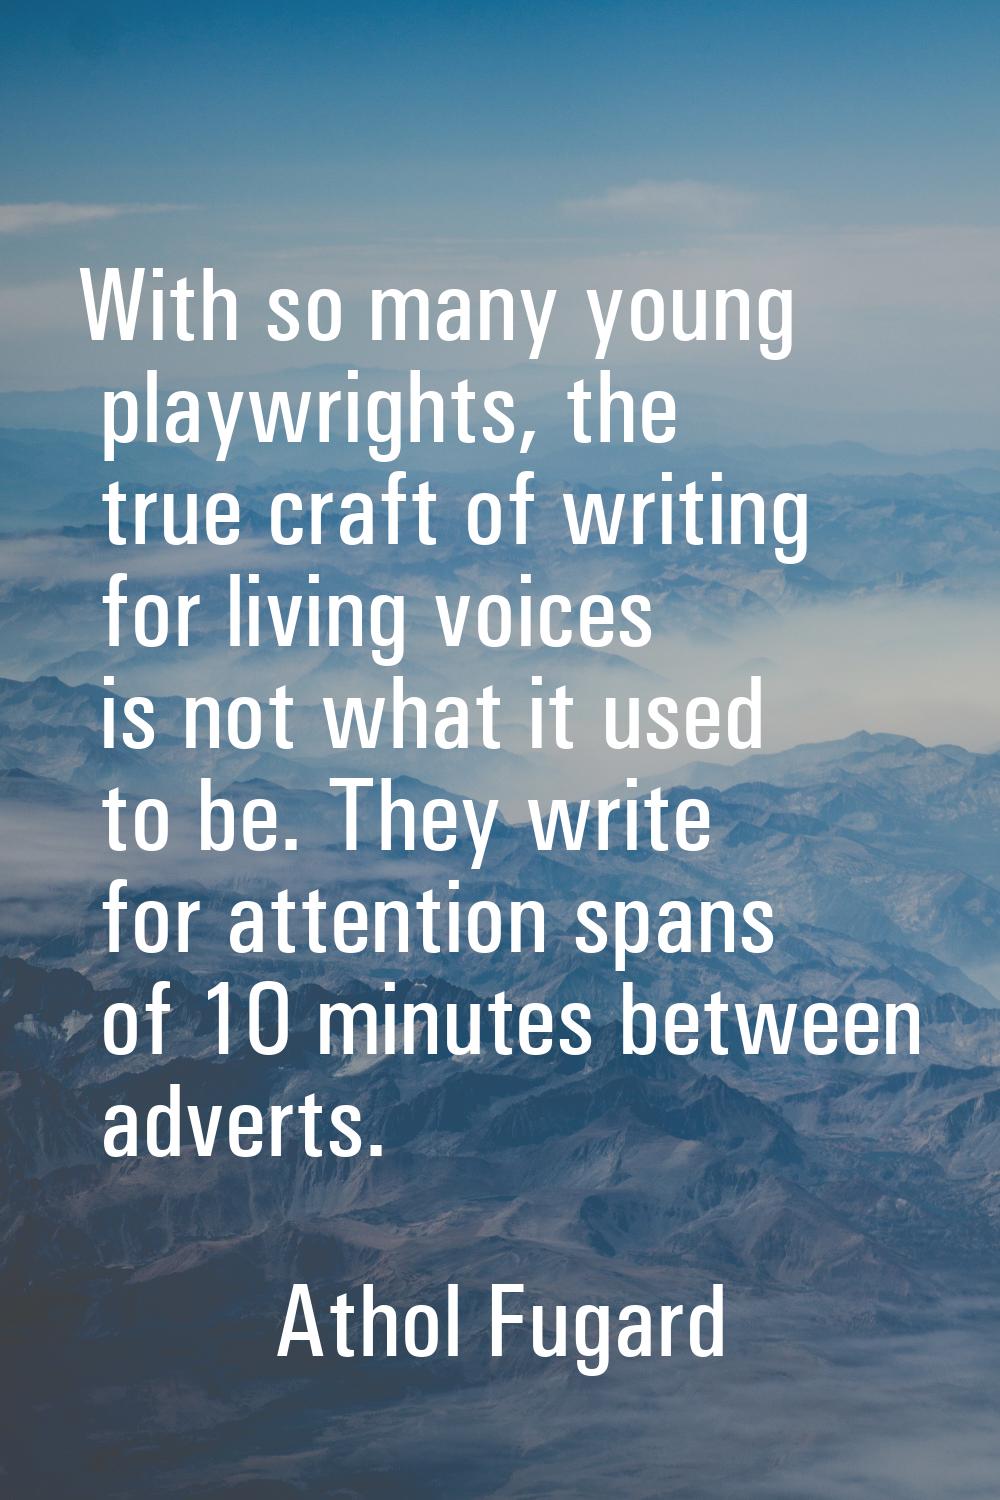 With so many young playwrights, the true craft of writing for living voices is not what it used to 